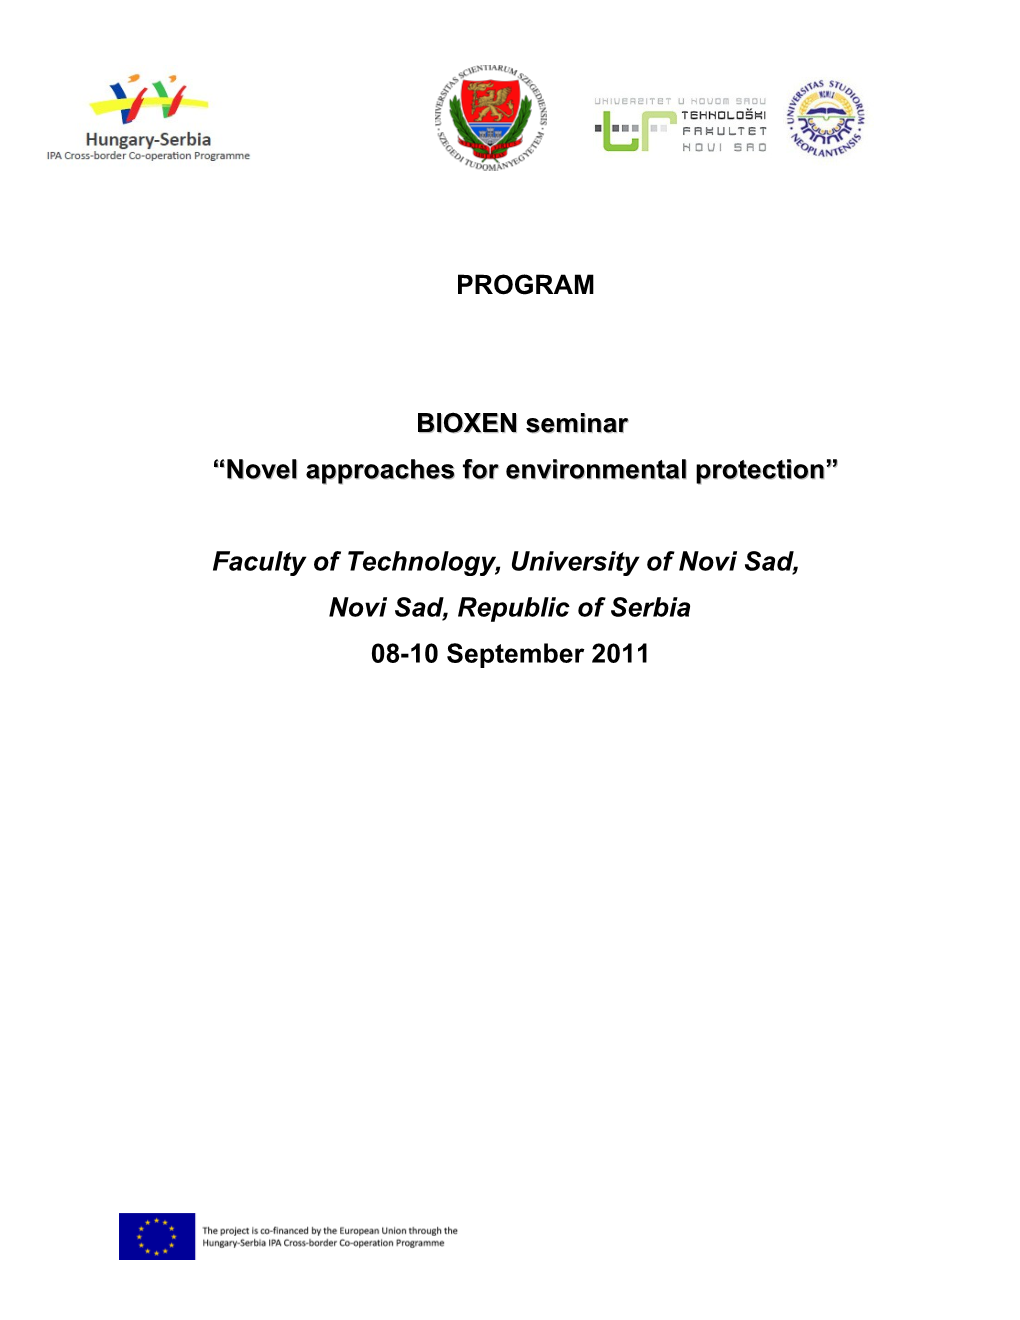 Novel Approaches for Environmental Protection